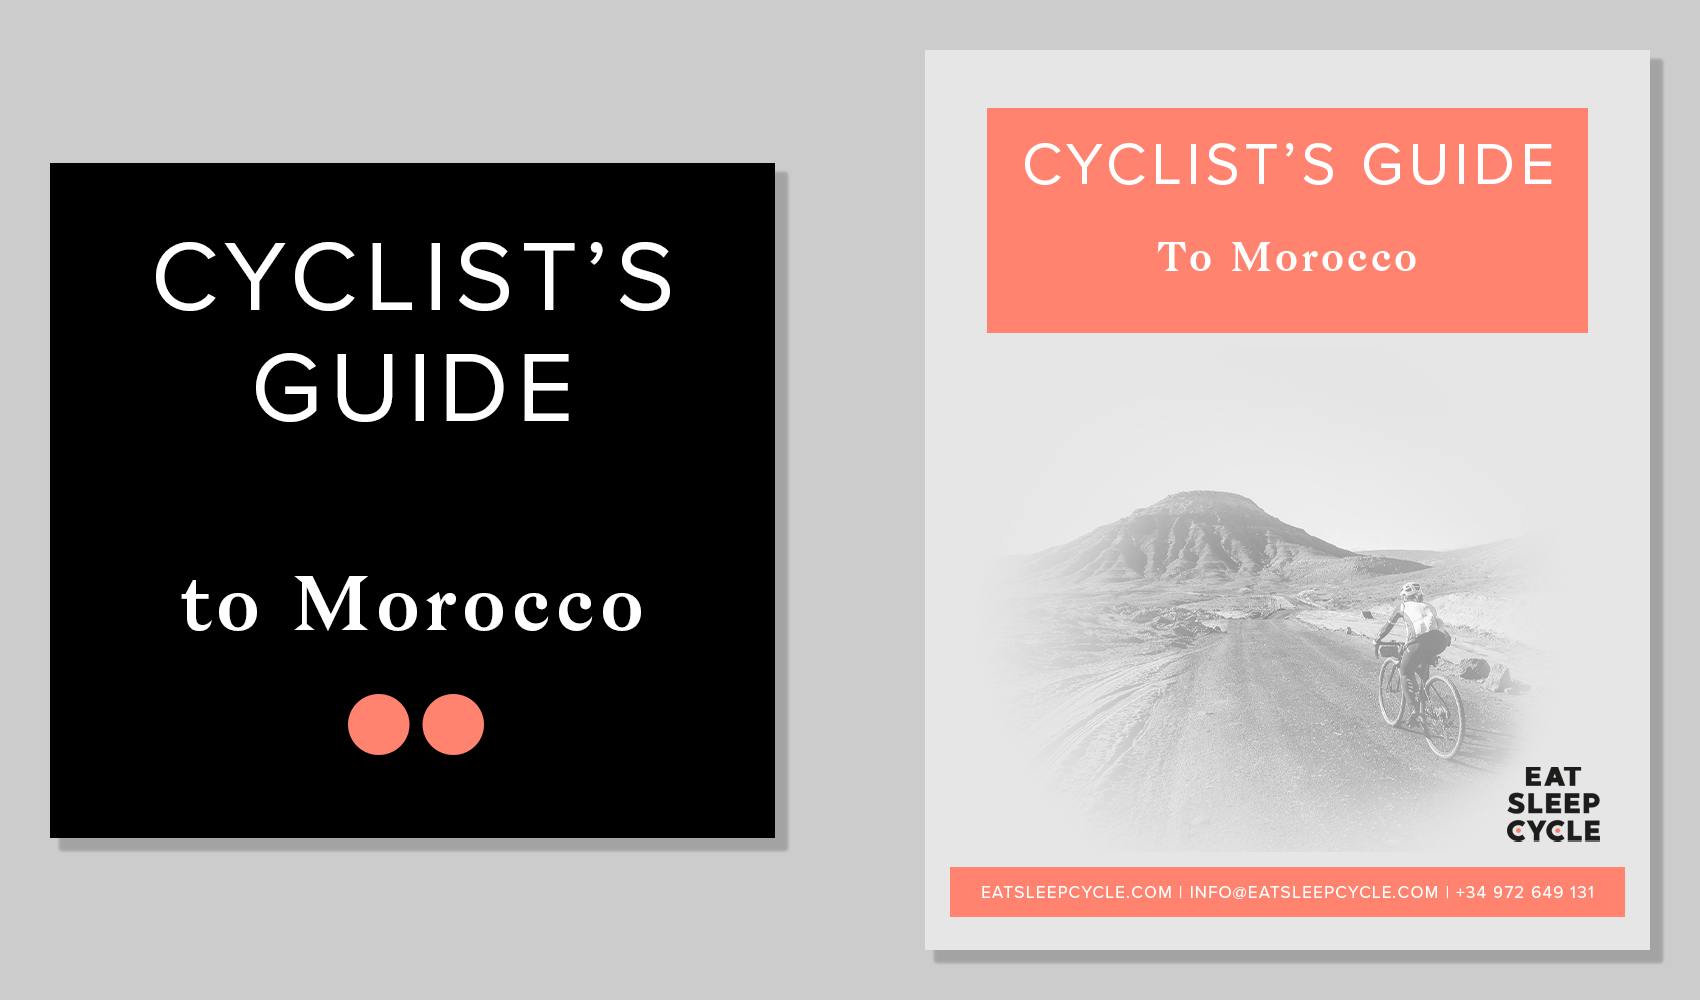 Cyclists Guide to Morocco from Eat Sleep Cycle